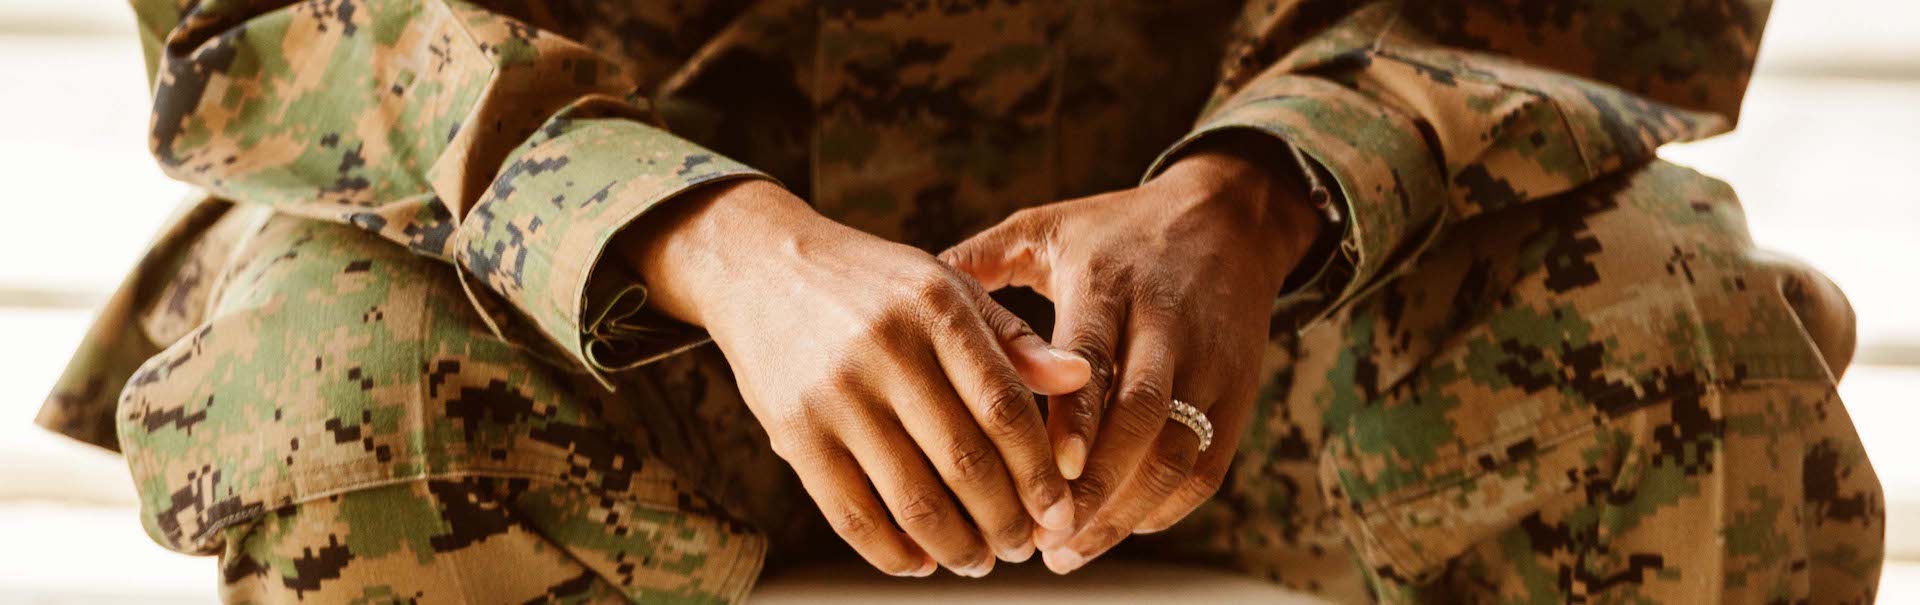 Veterans Recovery Resources Drug and Alcohol Addiction Treatment Programs for Veterans